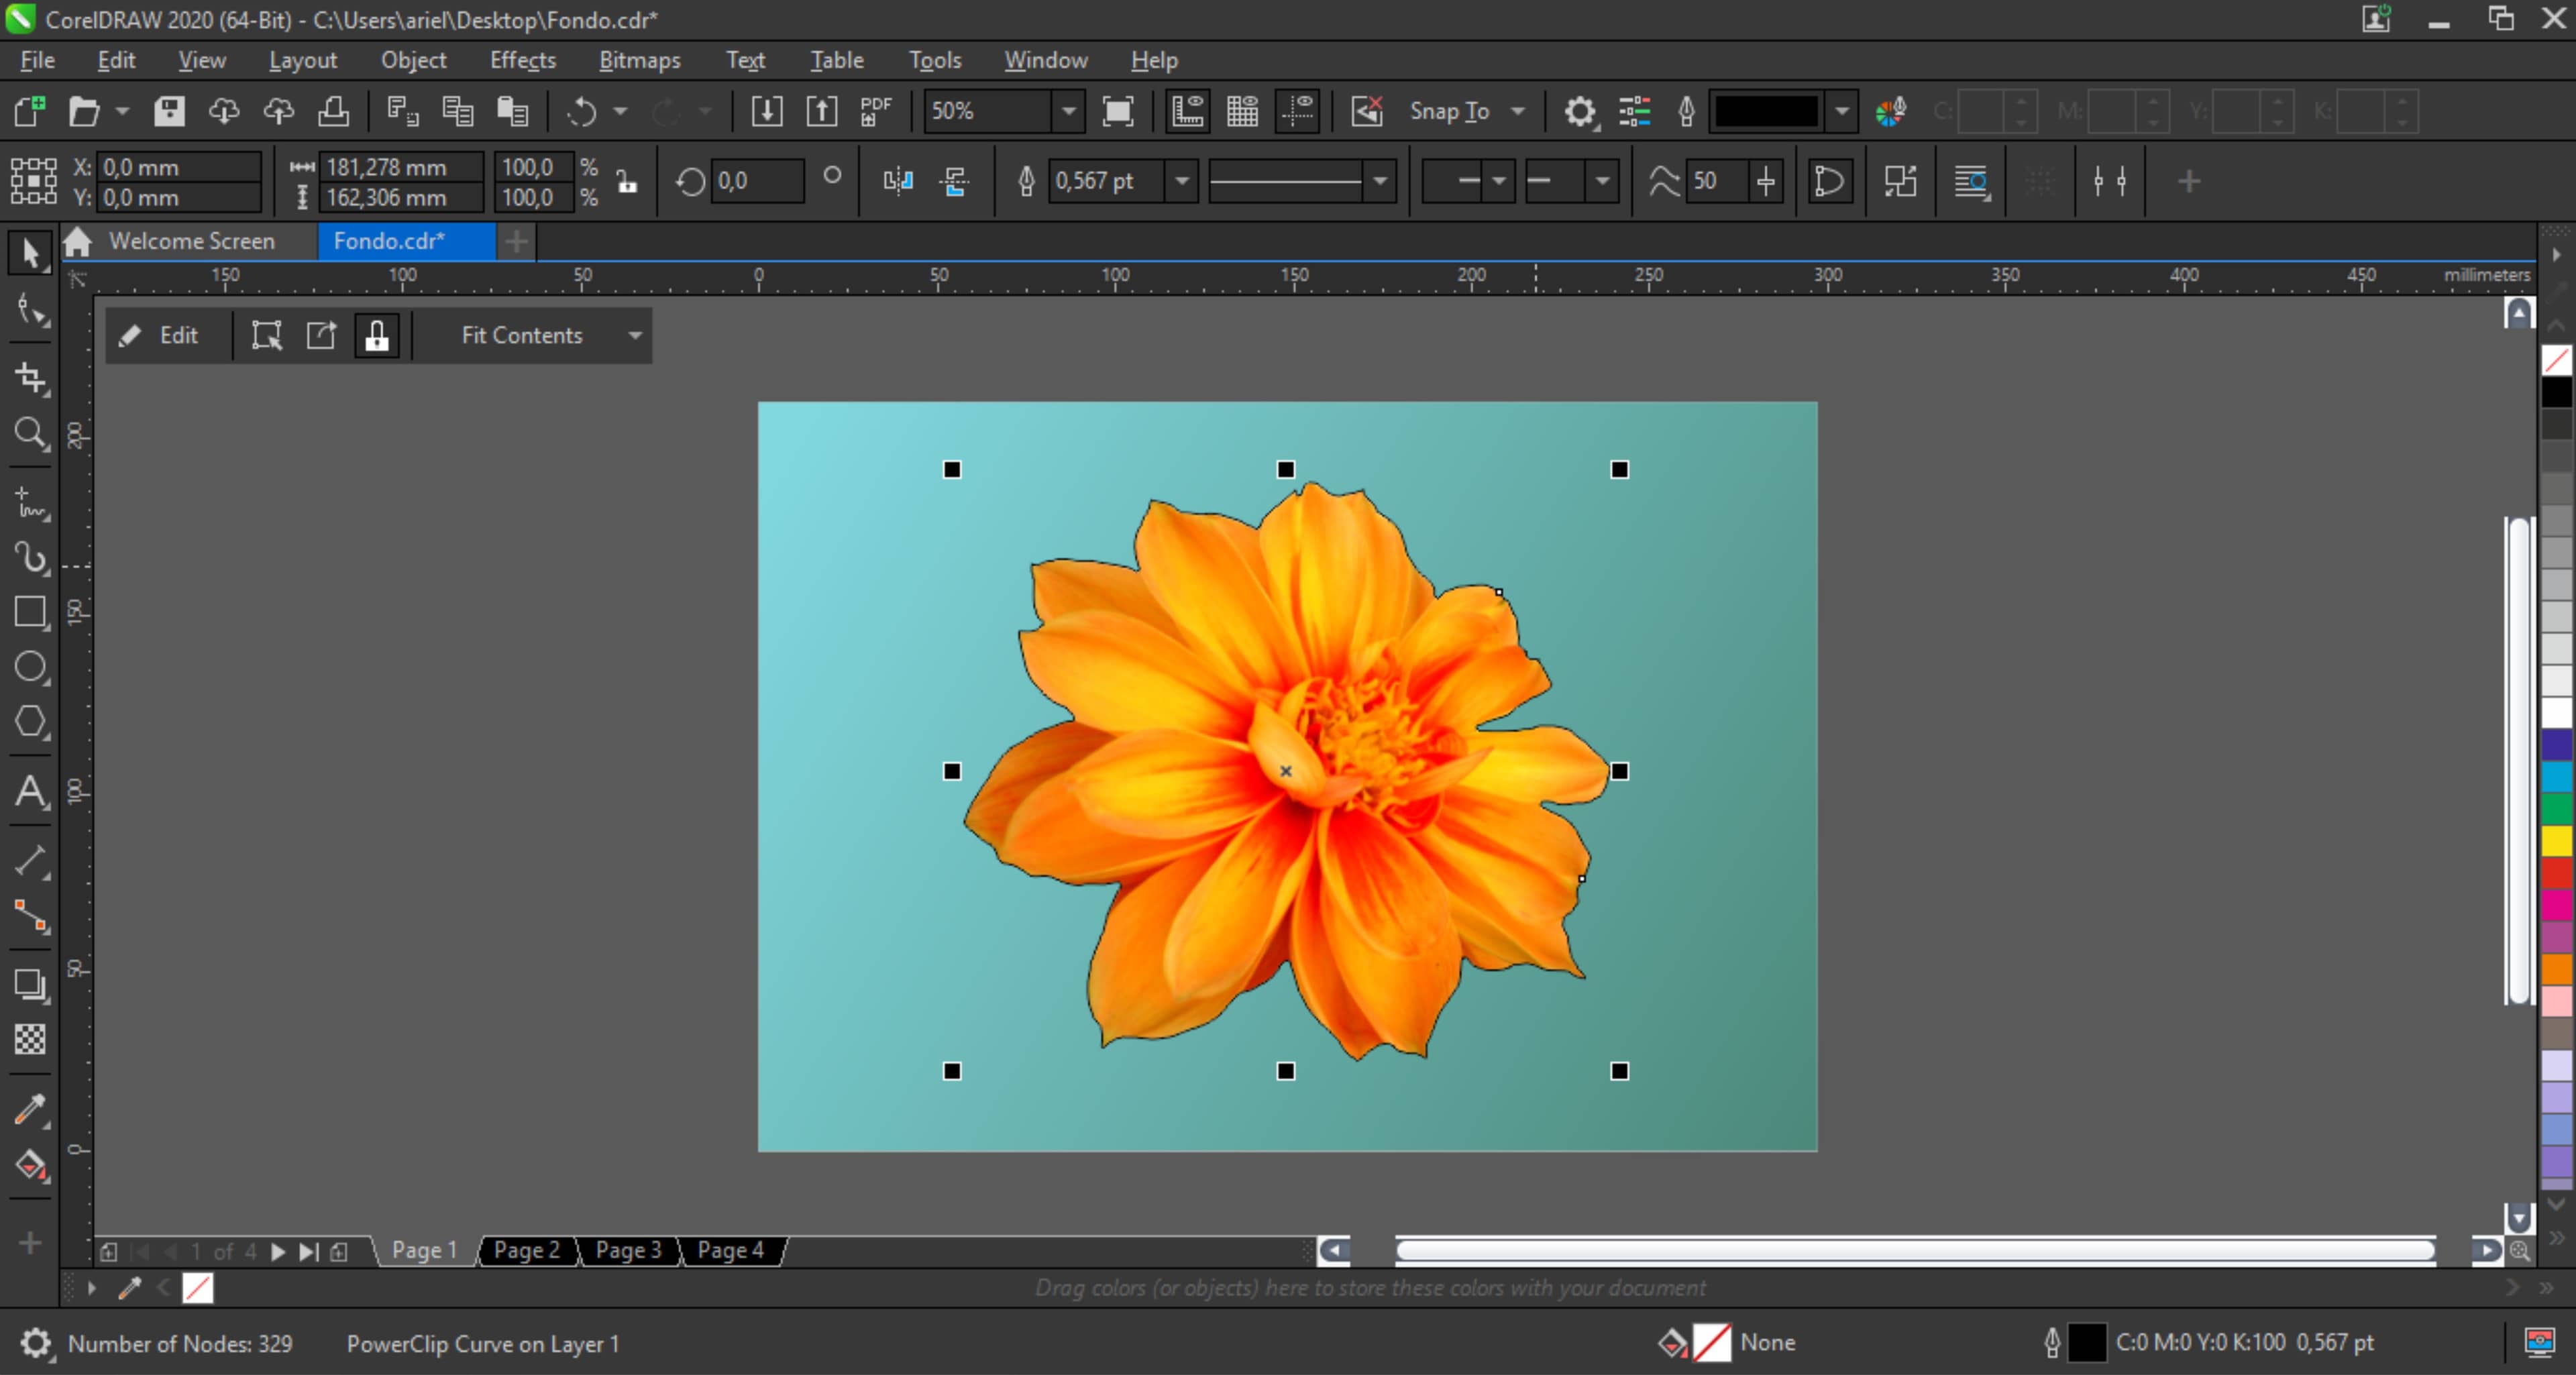 Removing the background from images with CorelDRAW and PHOTO-PAINT |  CorelDRAW Tutorials